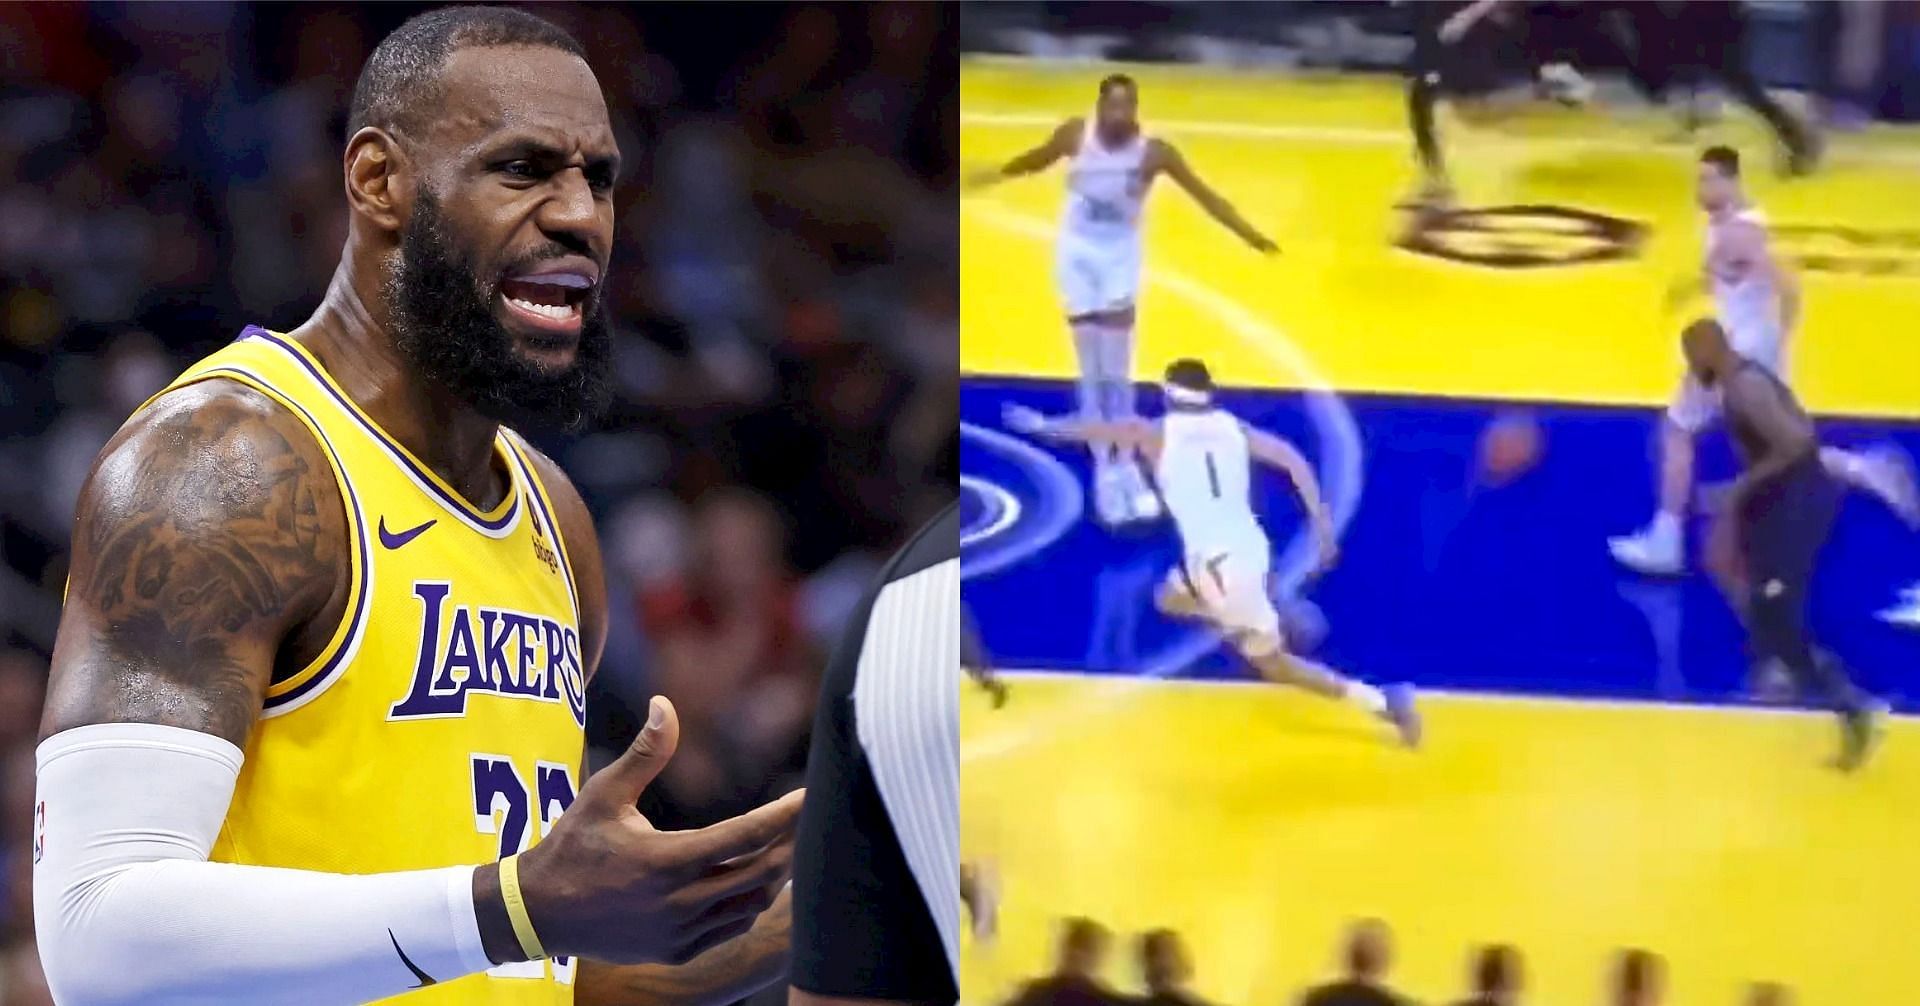 LeBron James livid with refs after they fail to spot kicked-ball violation against Devin Booker